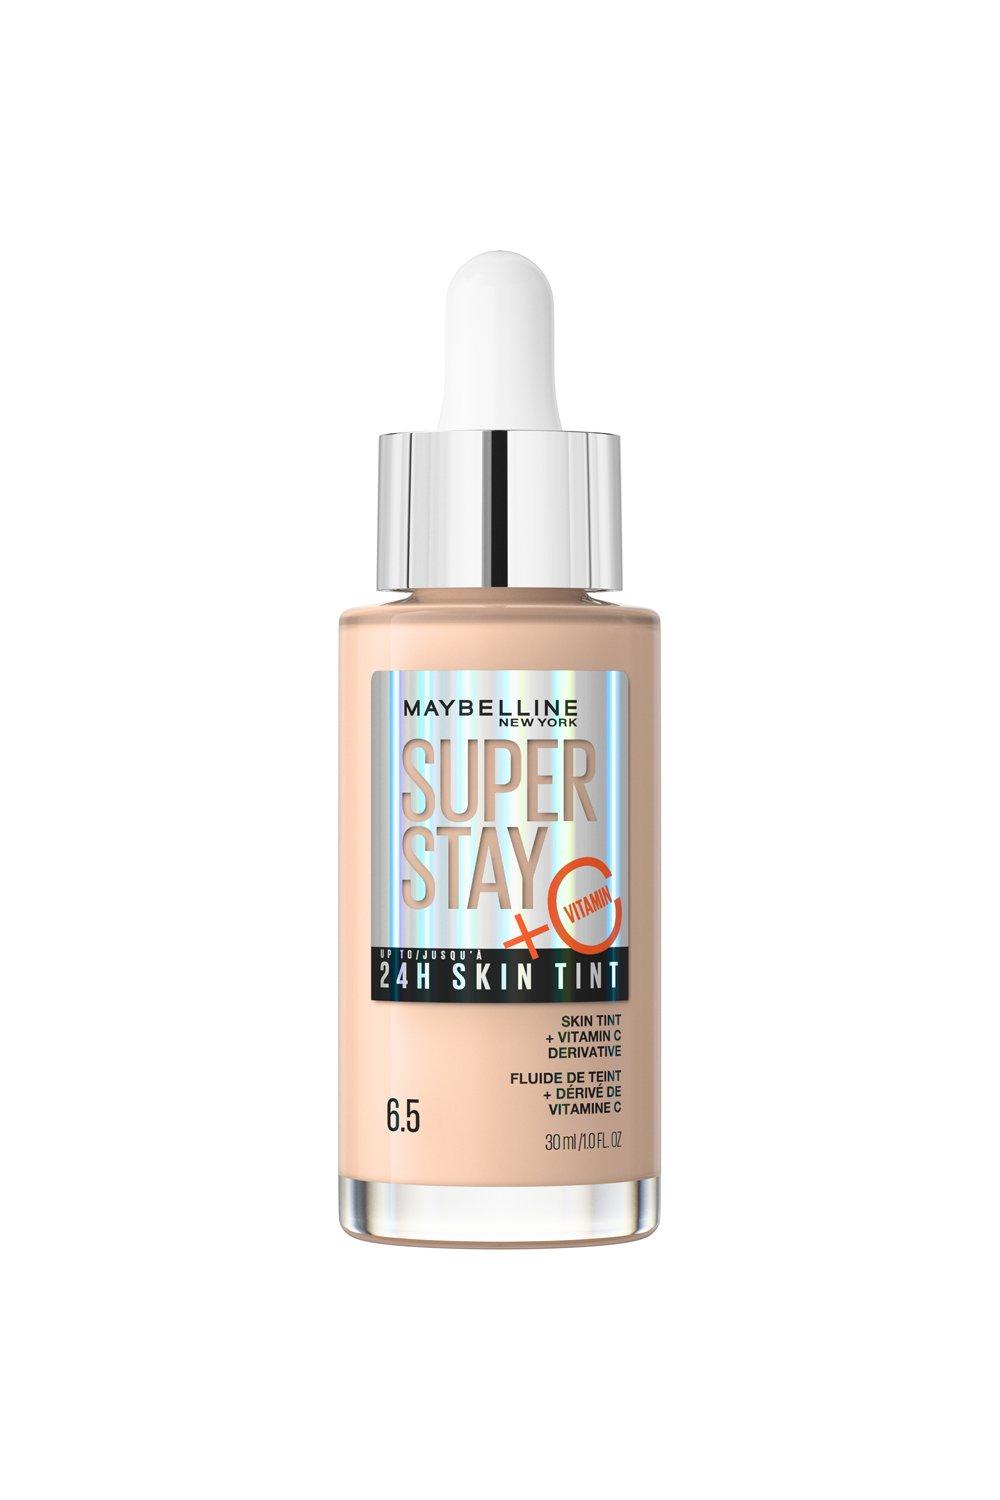 super stay up to 24h skin tint foundation + vitamin c